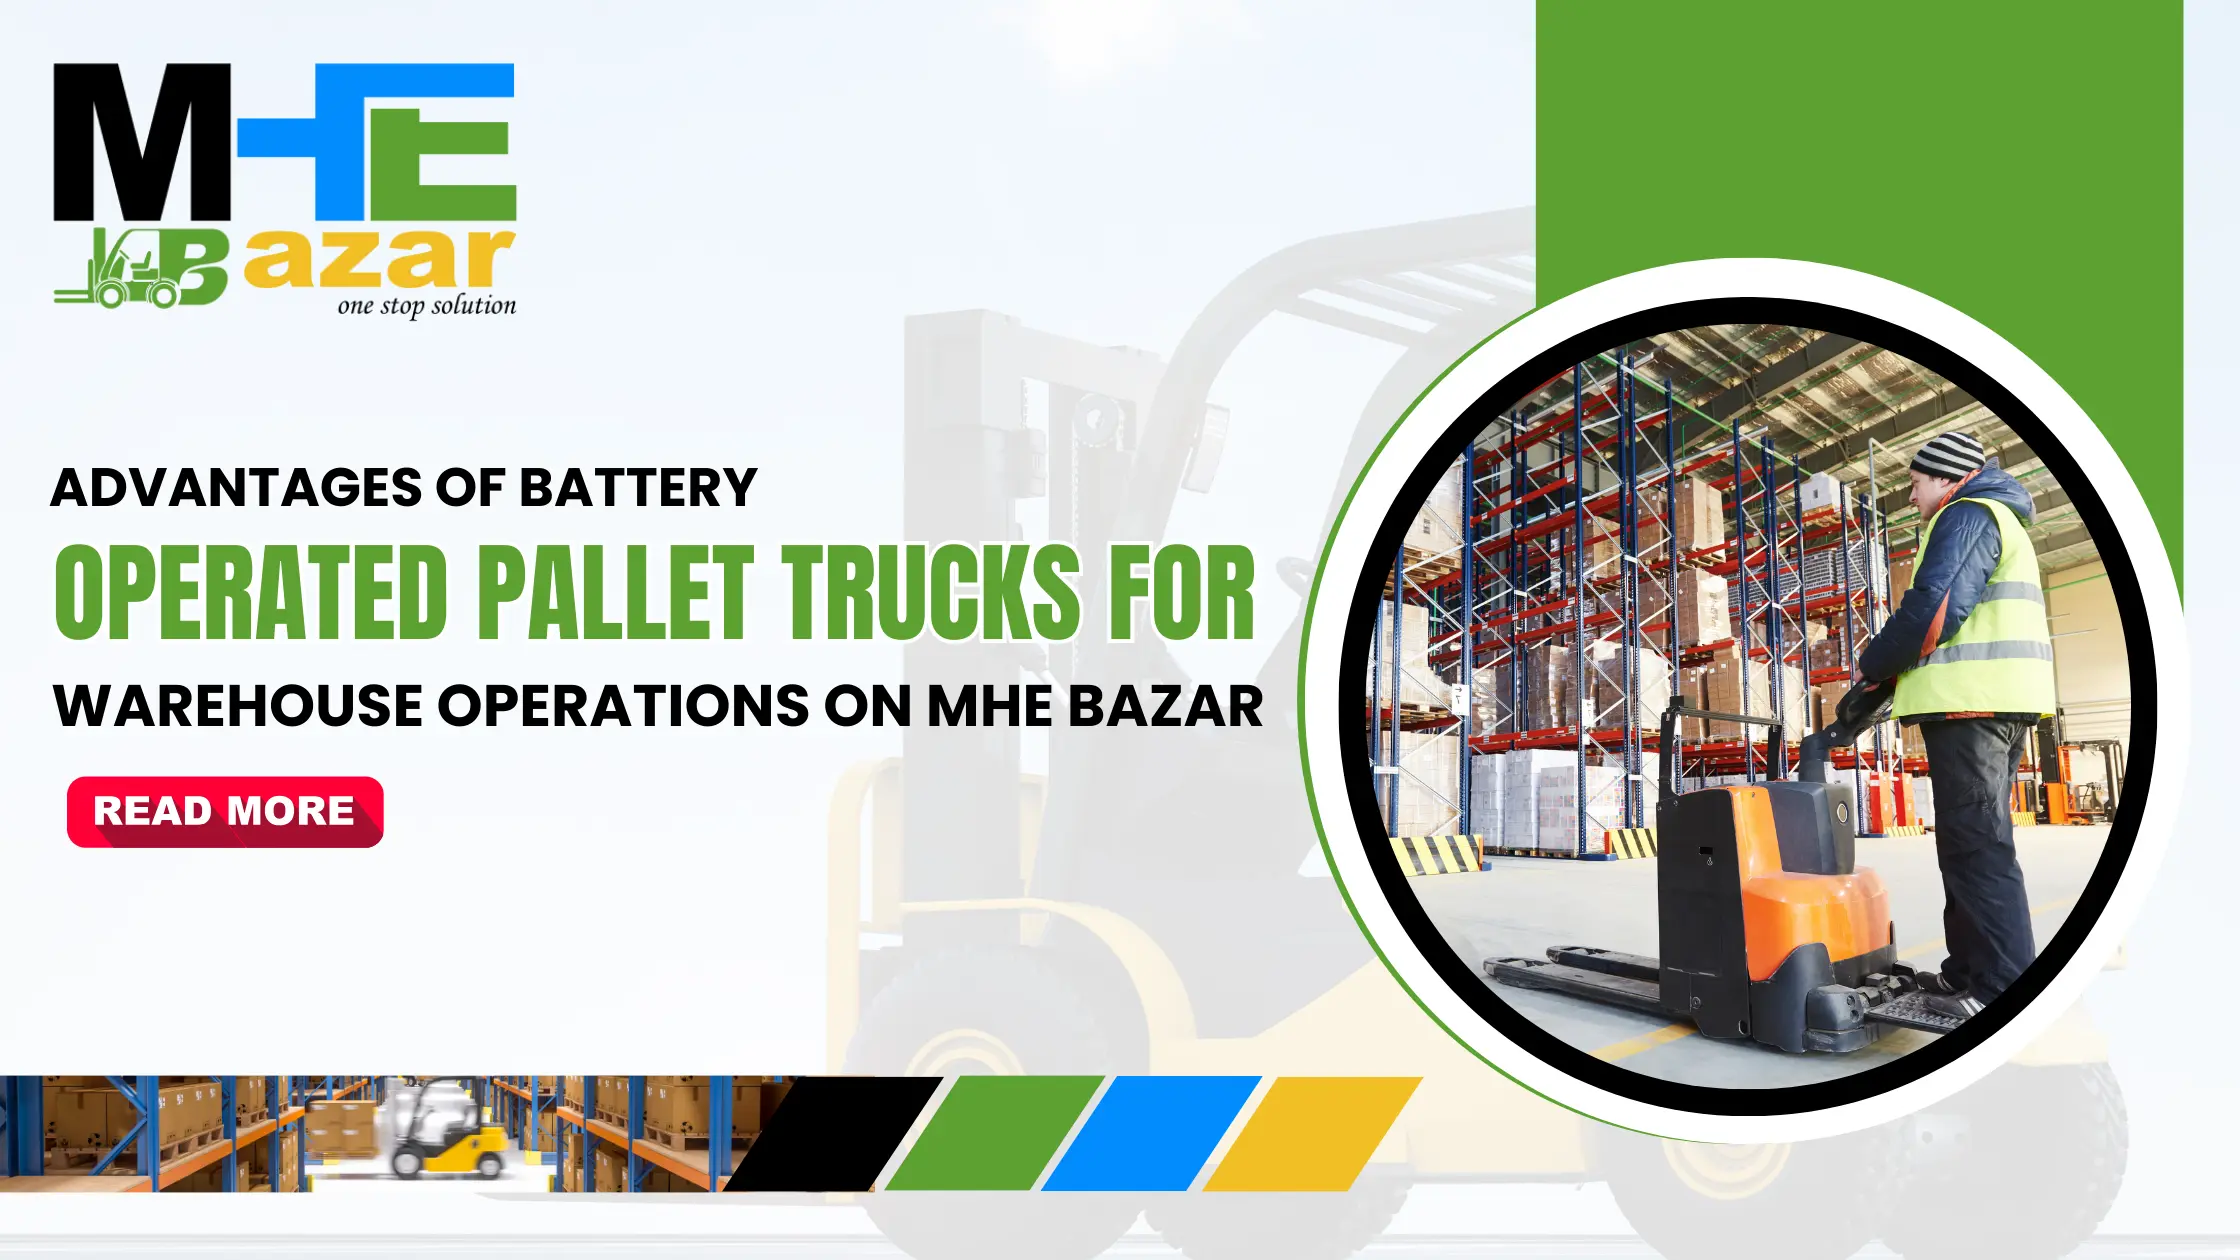 Advantages of Battery- Operated Pallet Trucks for Warehouse Operations on MHE Bazar.webp